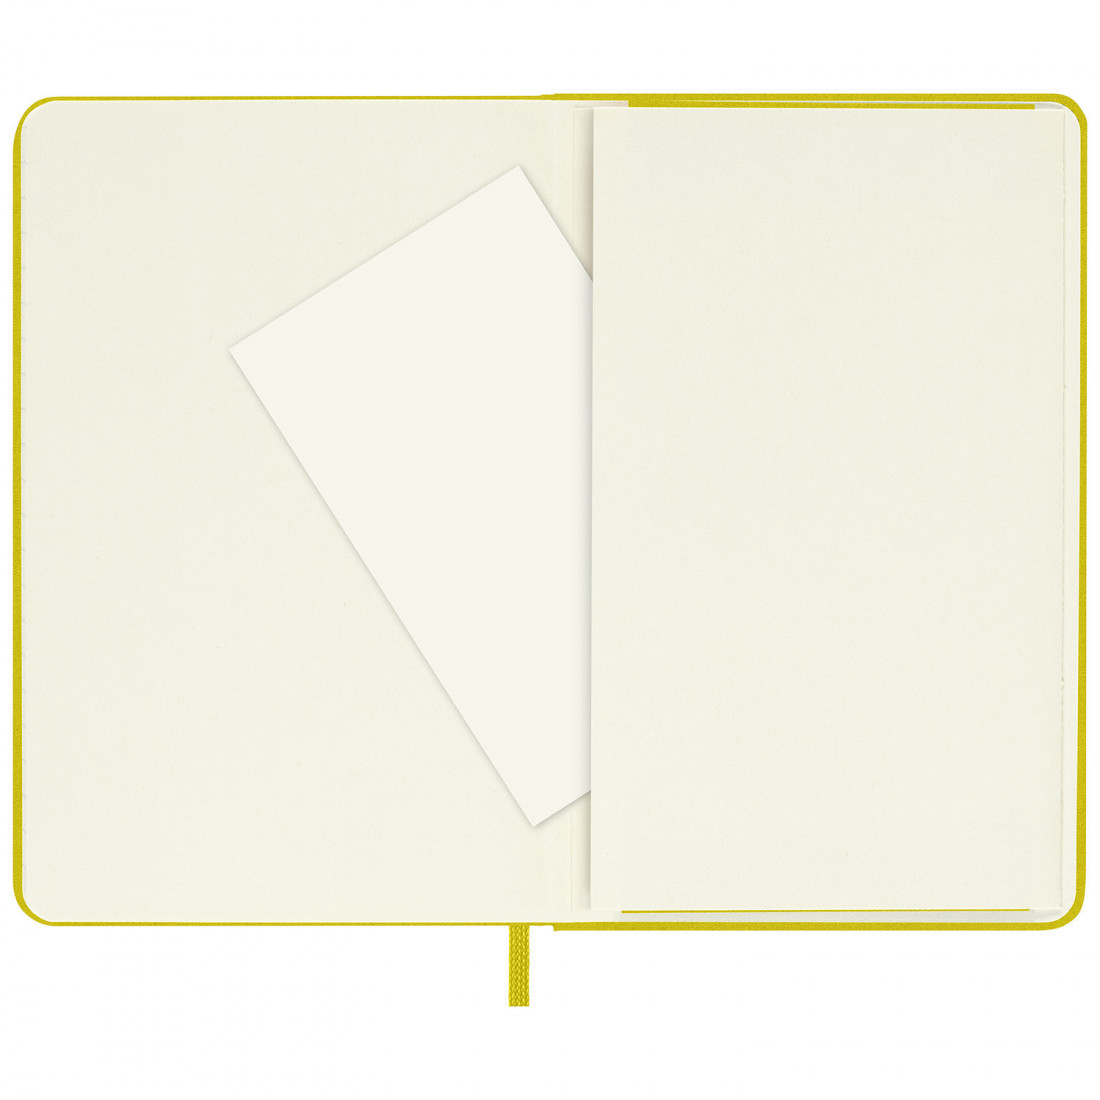 Notebook Extra Large 19x25 Silk Hay Yellow Ruled Hard Cover Moleskine